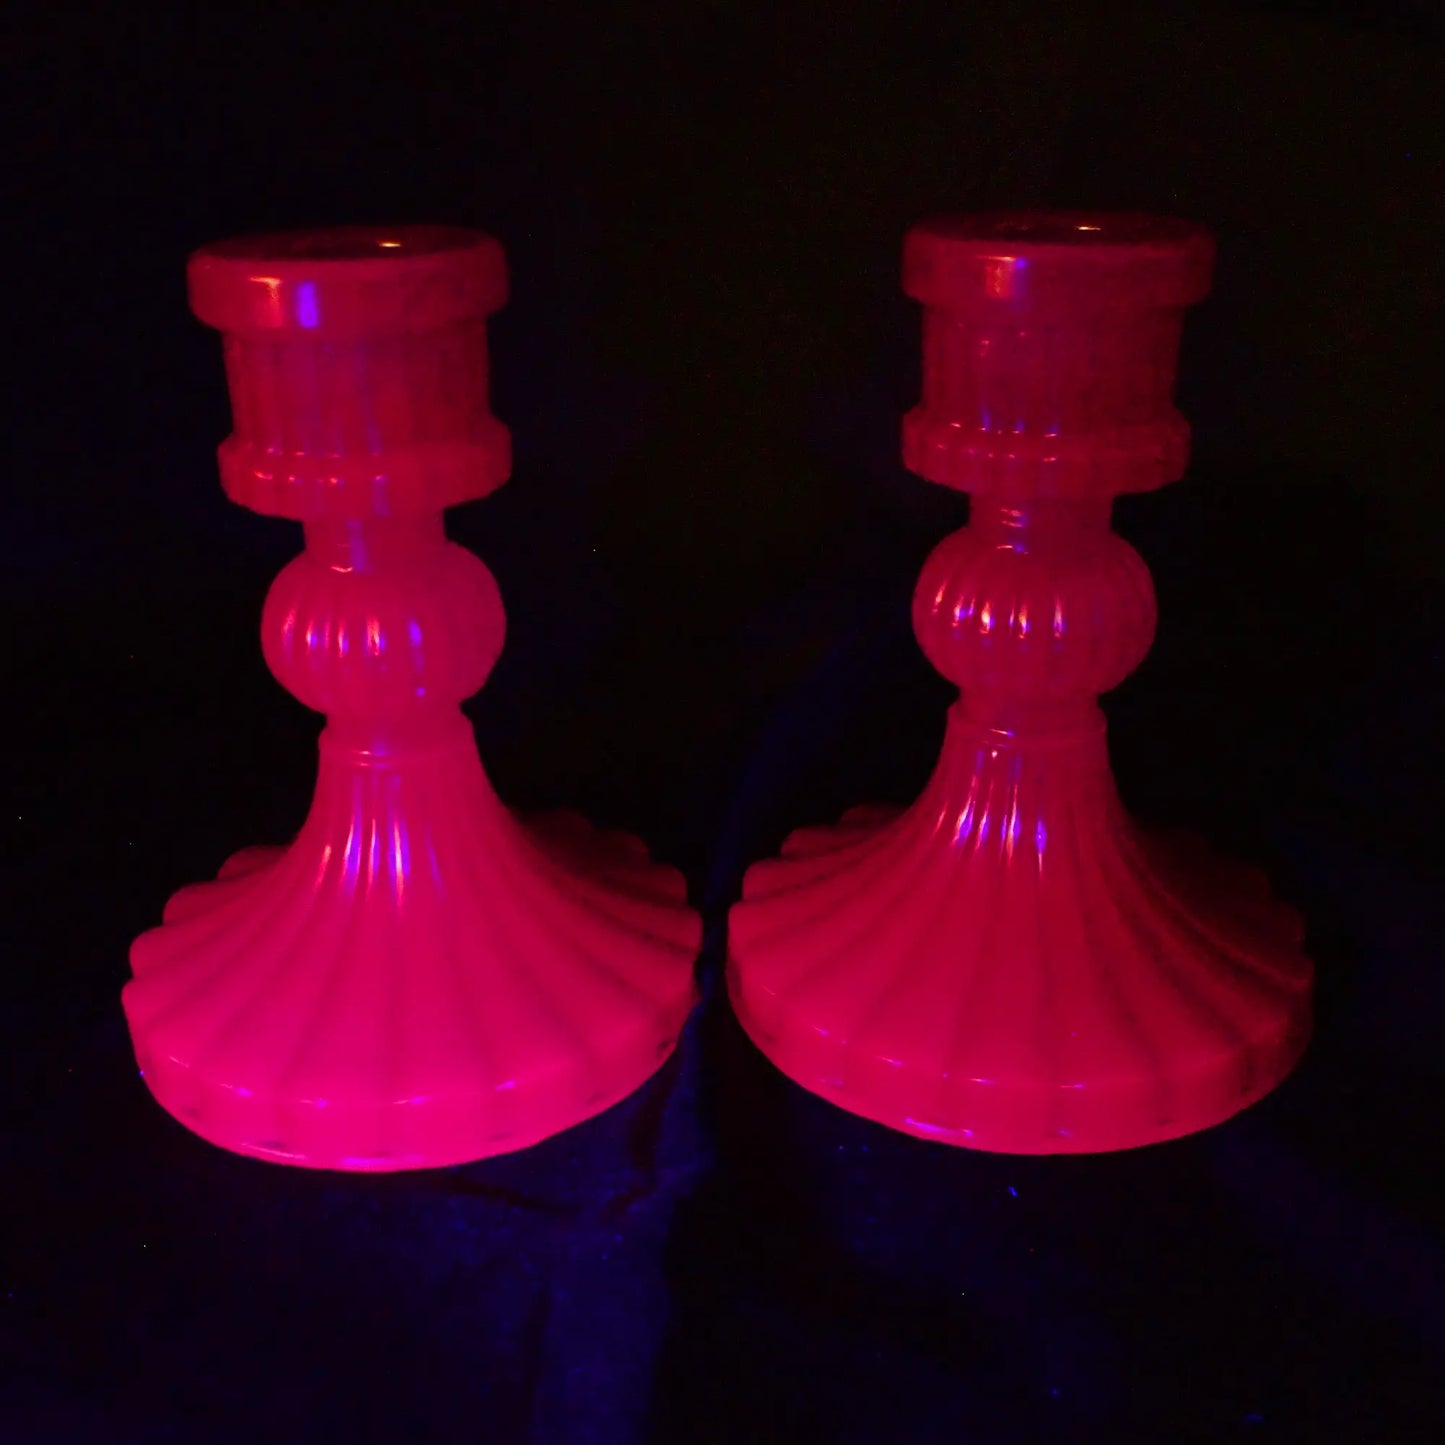 Photo of the vintage style handmade neon purple resin candlestick holders fluorescing pink under a UV light.